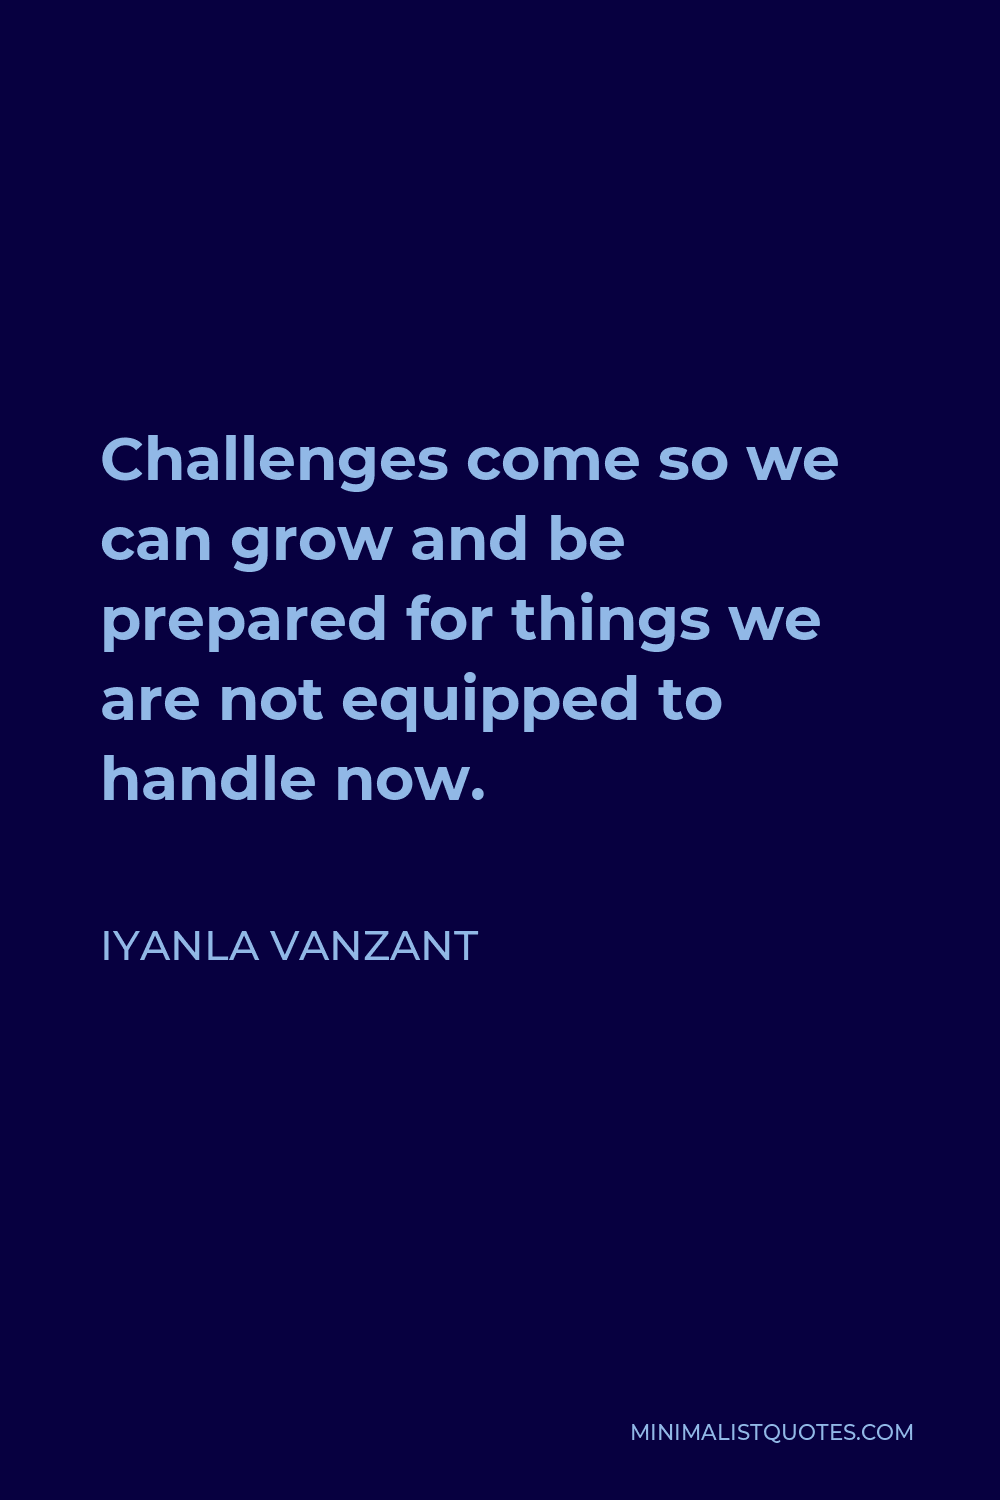 Iyanla Vanzant Quote - Challenges come so we can grow and be prepared for things we are not equipped to handle now.